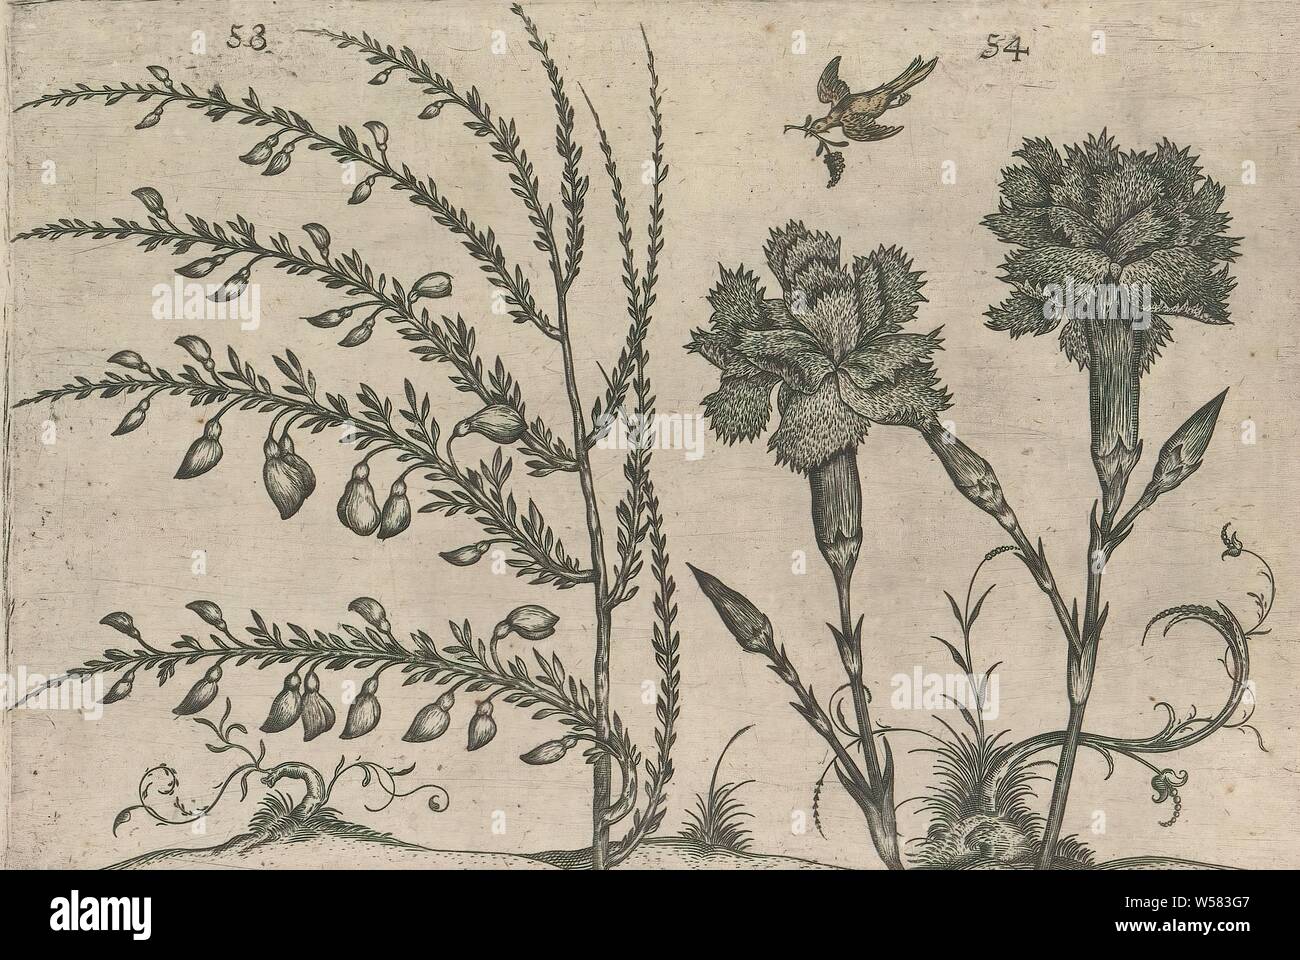 Garden carnation (Dianthus caryophyllus) and broom (Cytisus scoparius), Garden carnation and broom. With a bird and some ornamental plants. FIGs. 53 and 54 hand-numbered 27. On: Anselmi Boetii de Boot I.C. Brugensis & Rodolphi II. Imp. Novel. medici a cubiculis Florum, Herbarum, ac fructuum selectiorum icones, & vires pleraeque hactenus ignotæ. Part of the album with sheets and plates from De Boodts herbarium from 1640. The twelfth of twelve albums with watercolors of animals, birds and plants known around 1600, commissioned by Emperor Rudolf II, flowers (with NAME), flowers: carnation birds Stock Photo